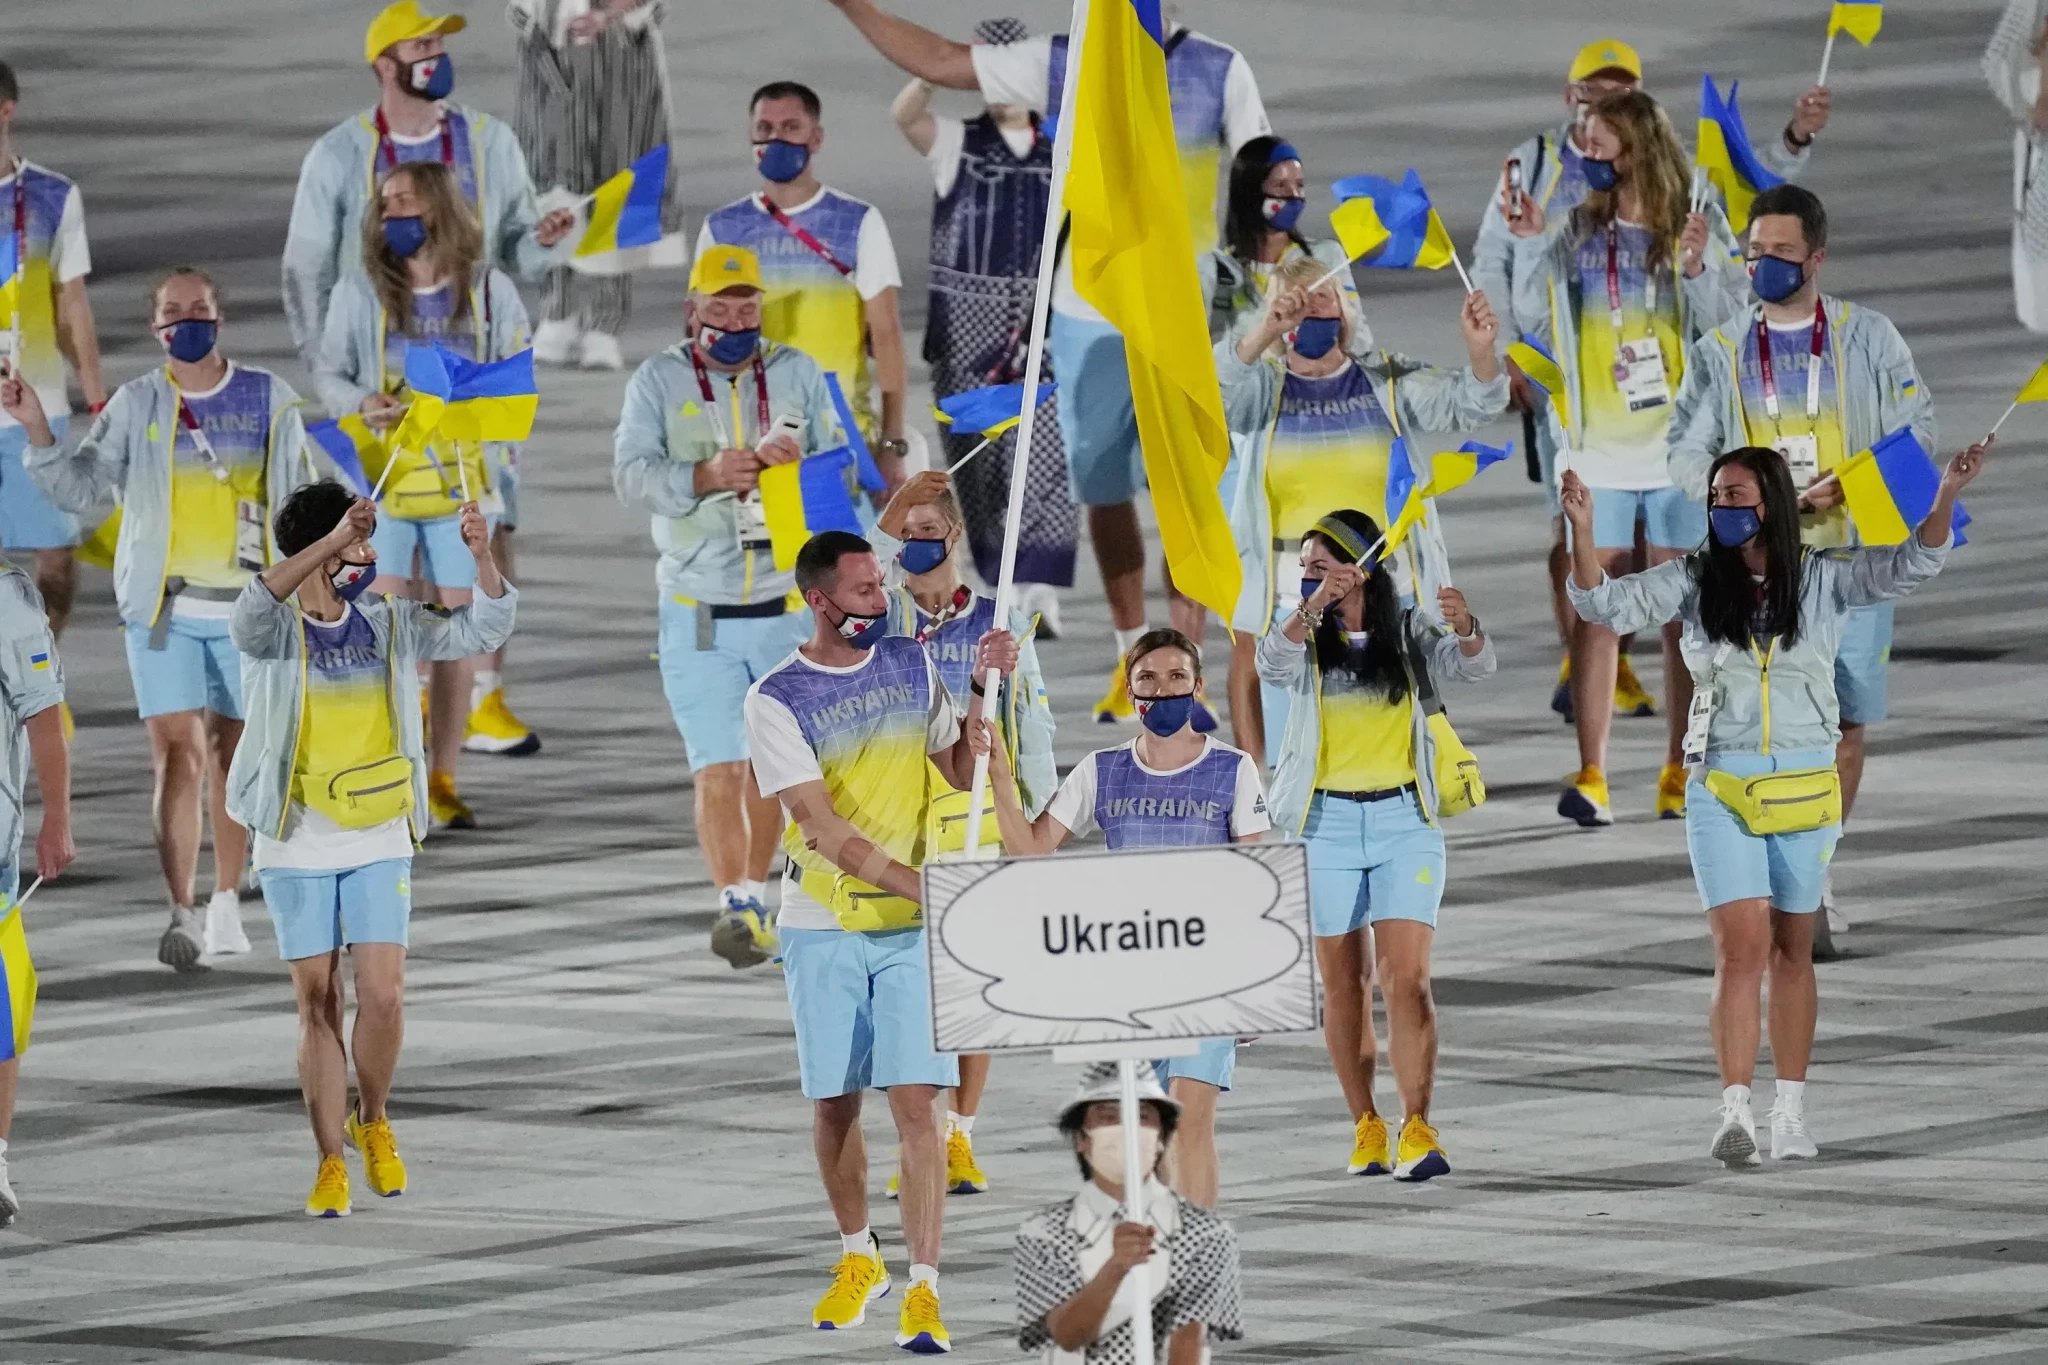 Ukraine announce will boycott Paris 2024 qualifying events where Russians are participating